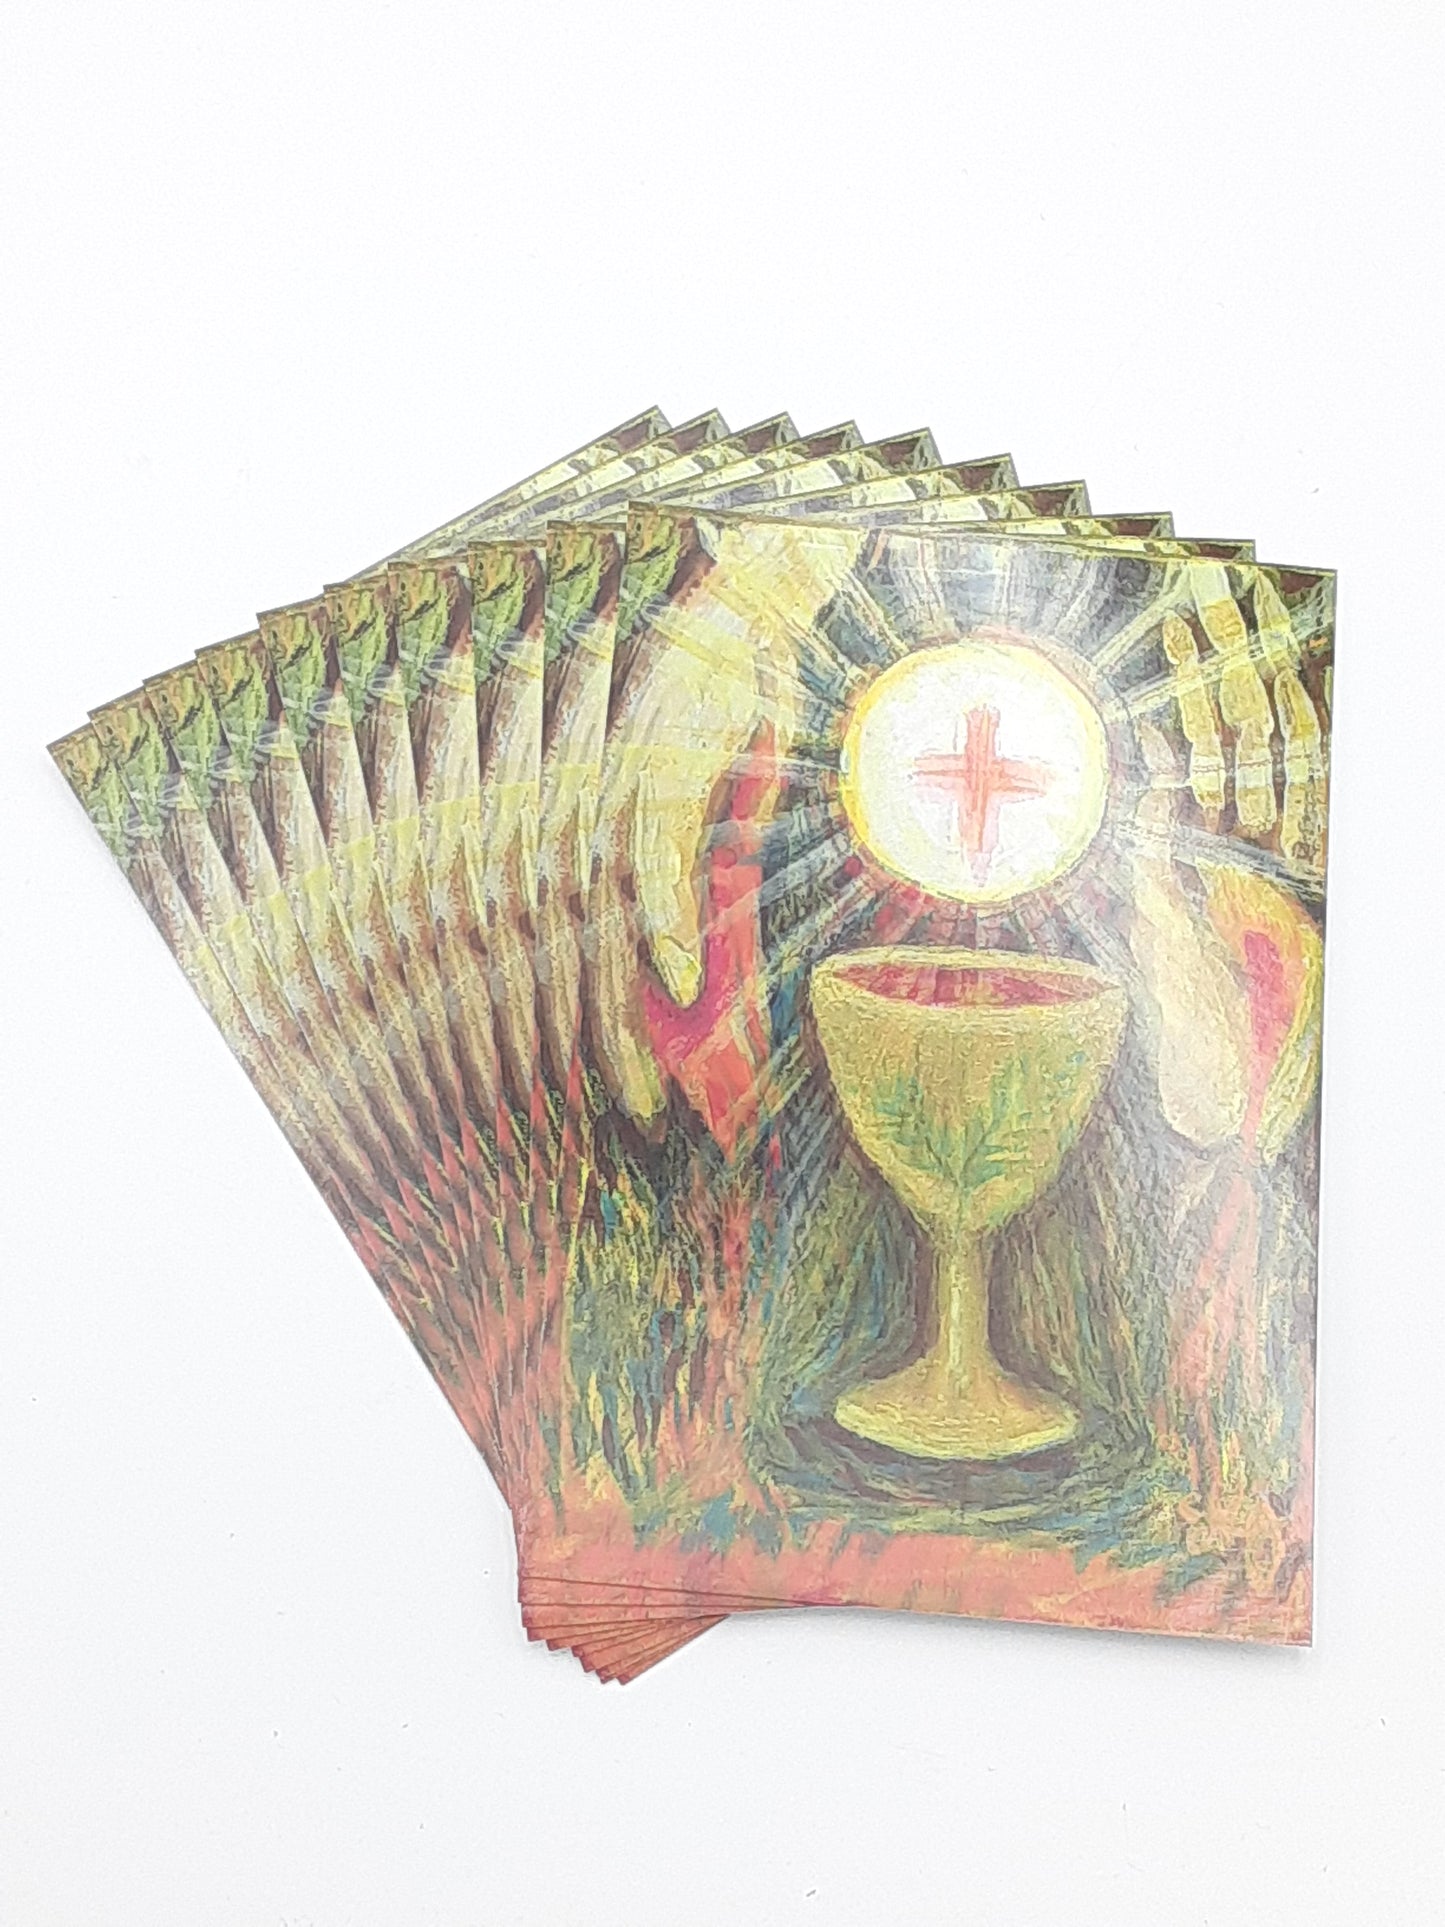 Eucharistic Image "By His Blood" Postcard